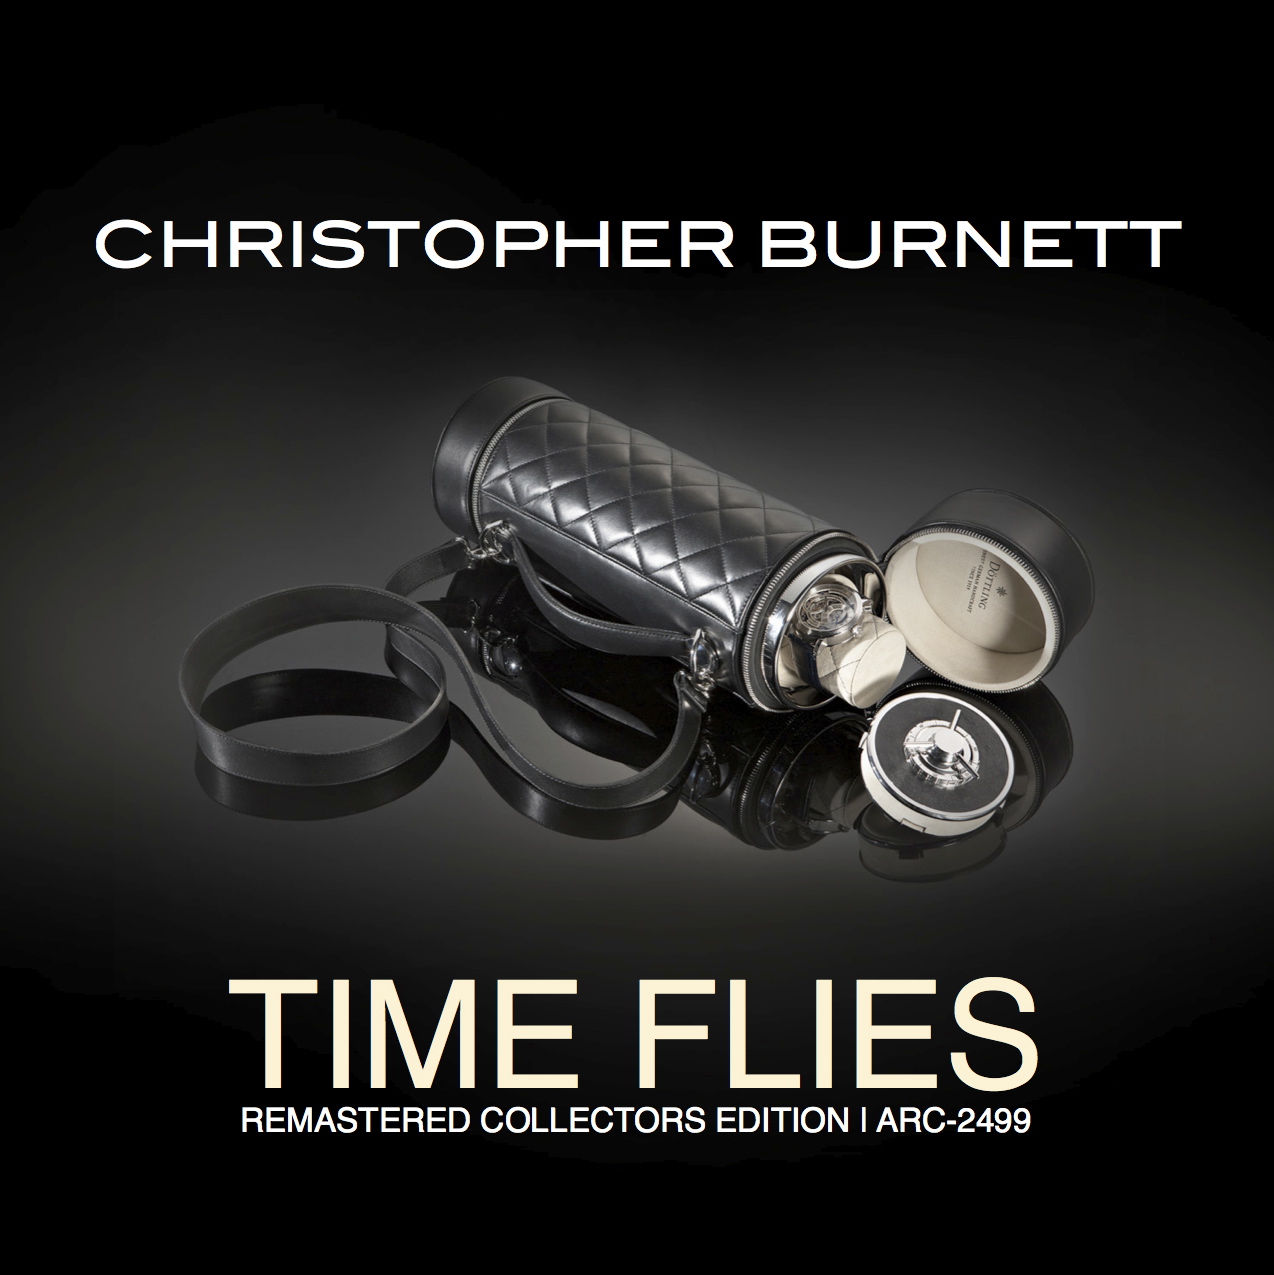 Album Time Flies (Remastered Collectors Edition)